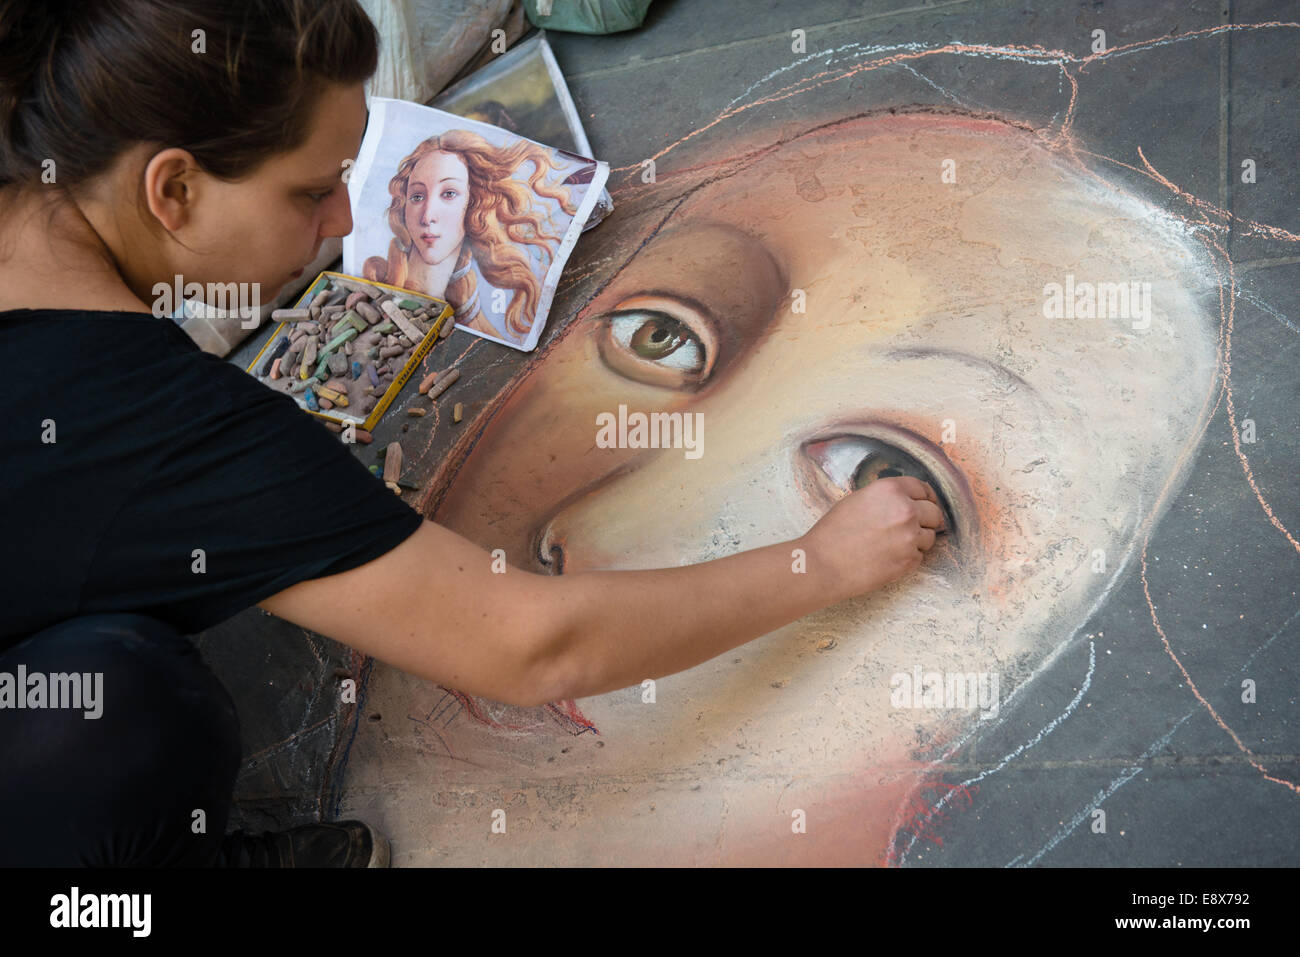 FLORENCE, ITALY - SEPTEMBER 15, 2014: artist painting face of Venus (from Botticelli) on the pavement by chalk, Florence, Italy Stock Photo